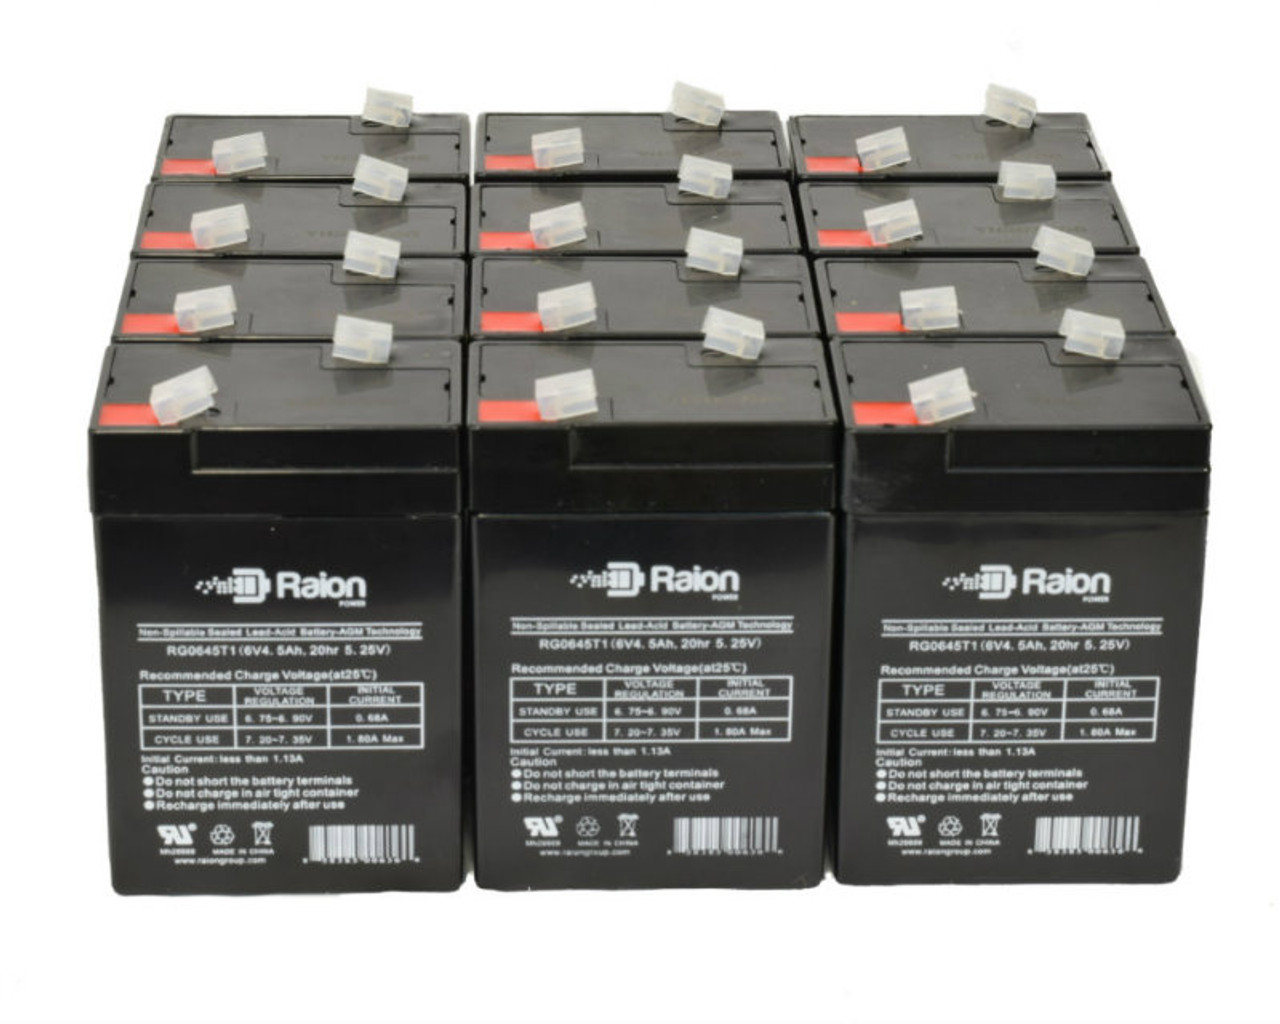 Raion Power 6V 4.5Ah Replacement Emergency Light Battery for Sure-Lites SL2602 - 12 Pack